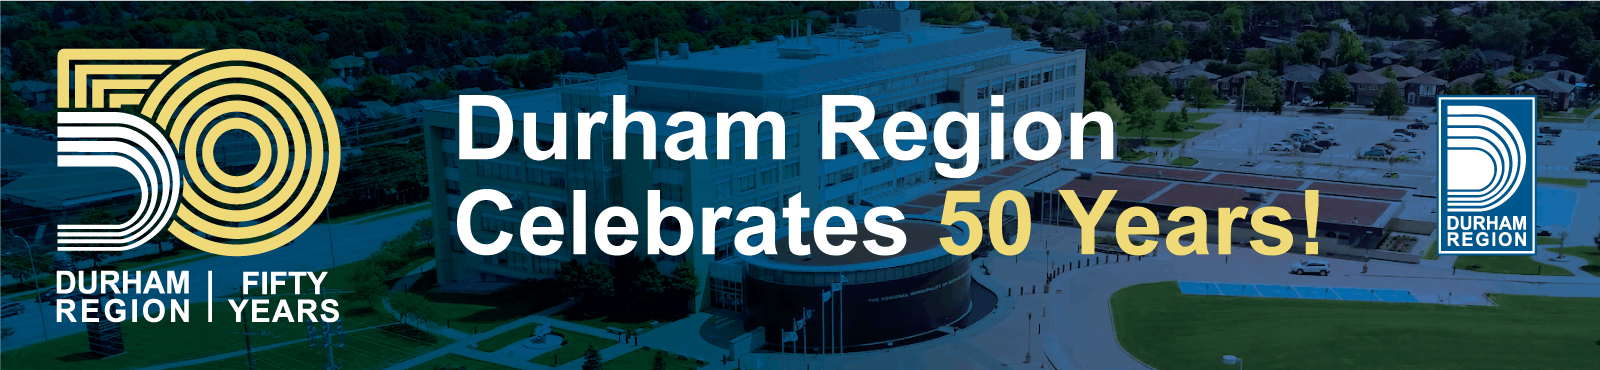 An aerial view of the Region of Durham headquarters with text that reads “Durham Region Celebrates 50 Years!"